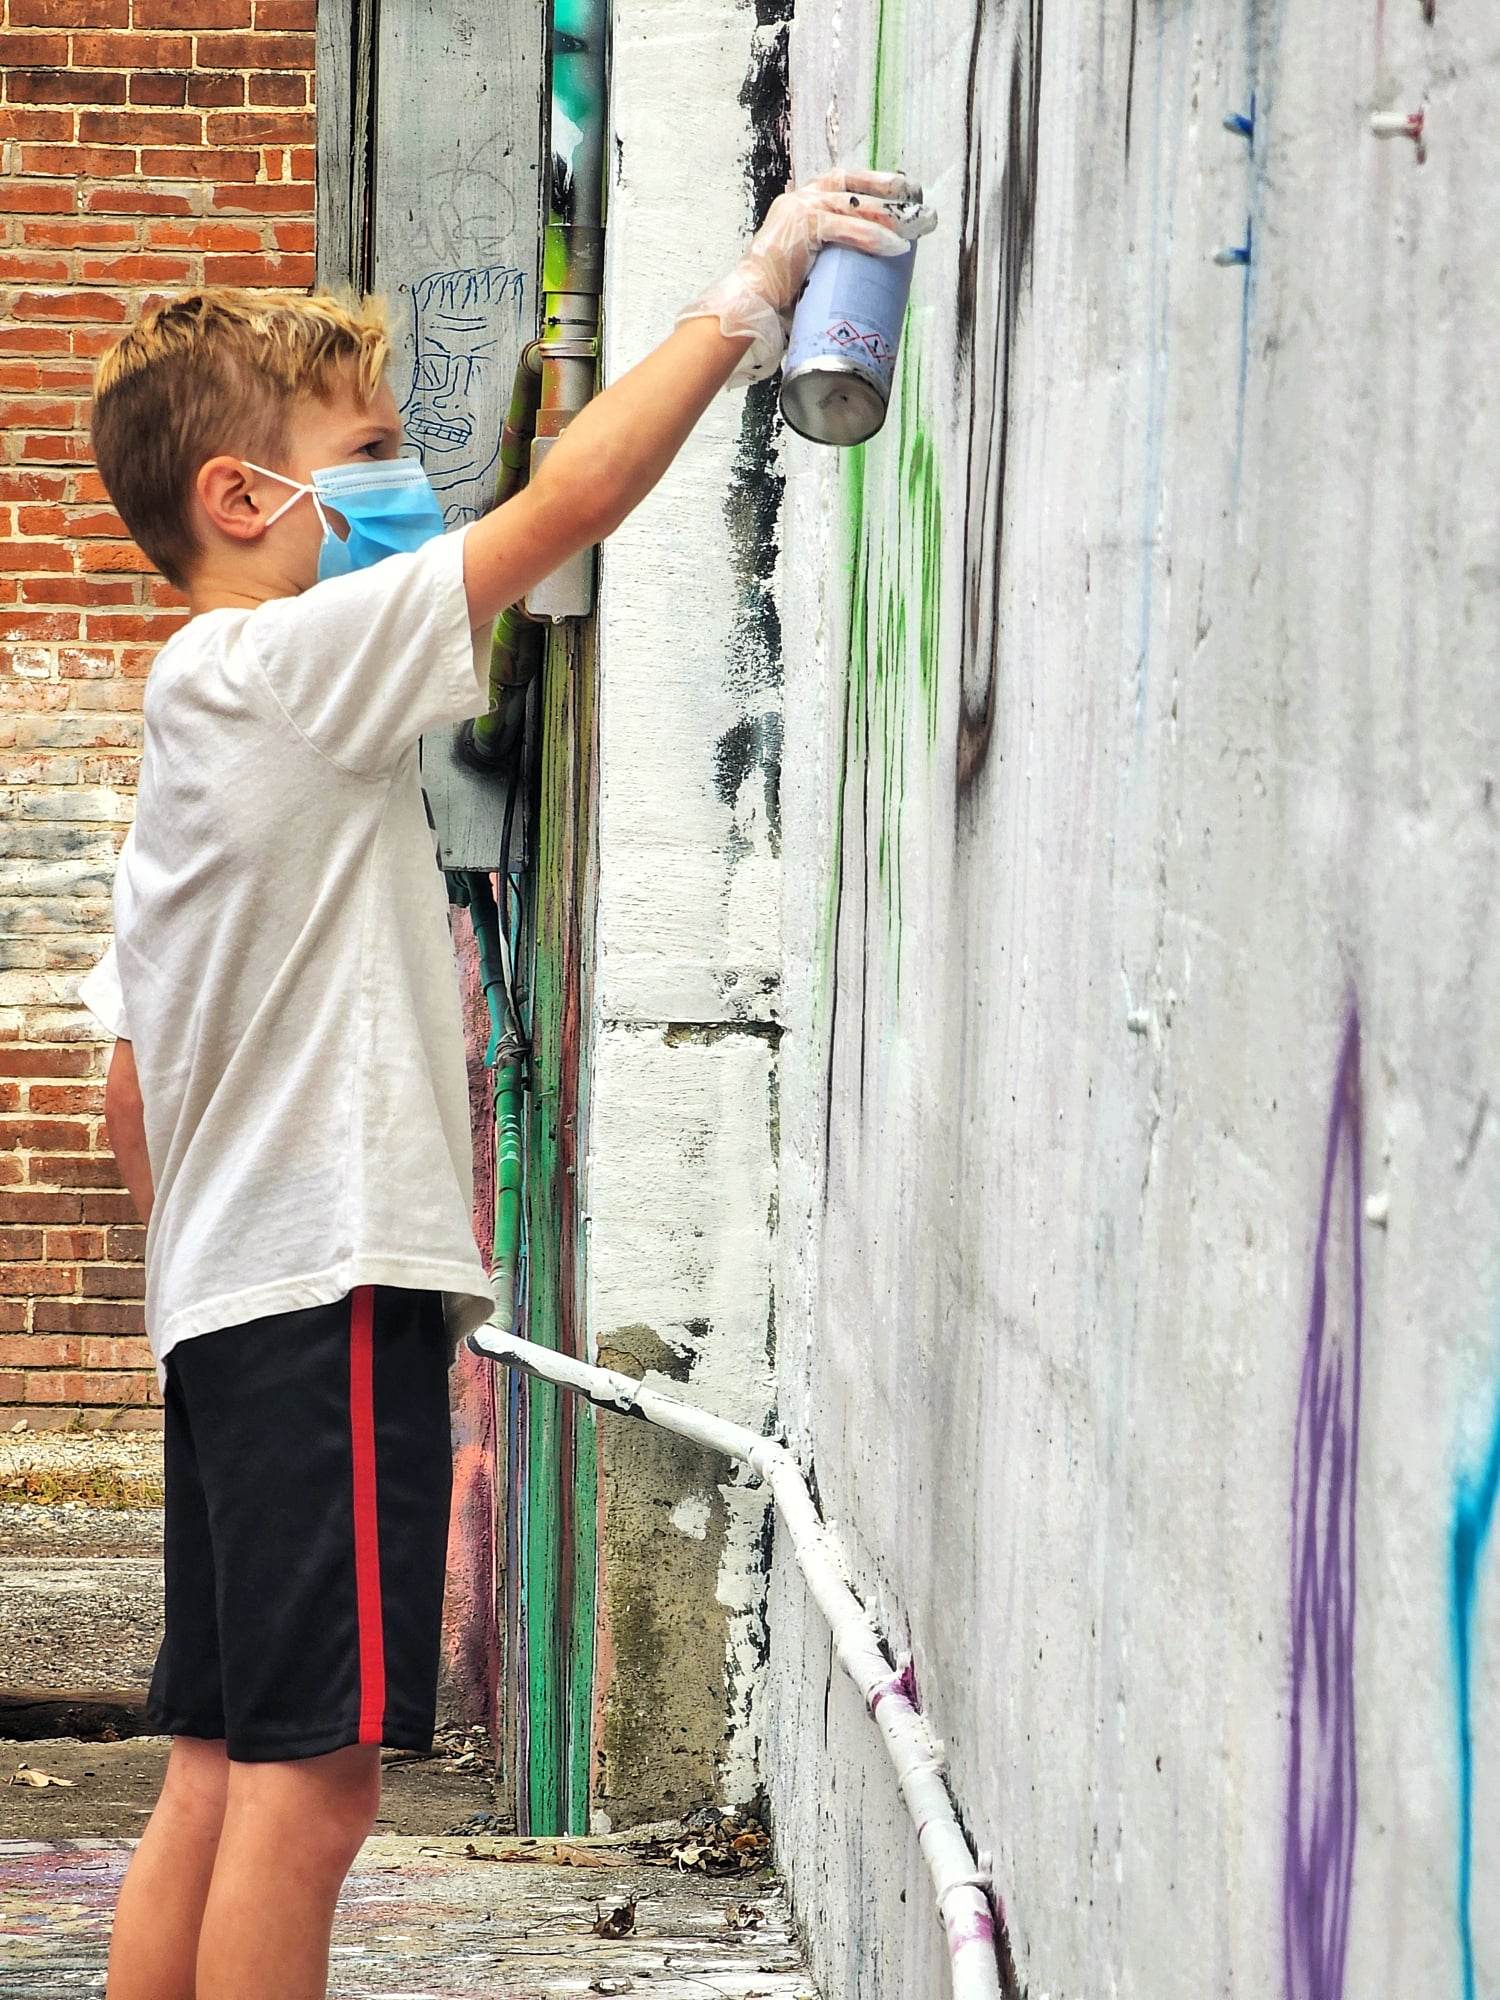 ruins young boy spray painting